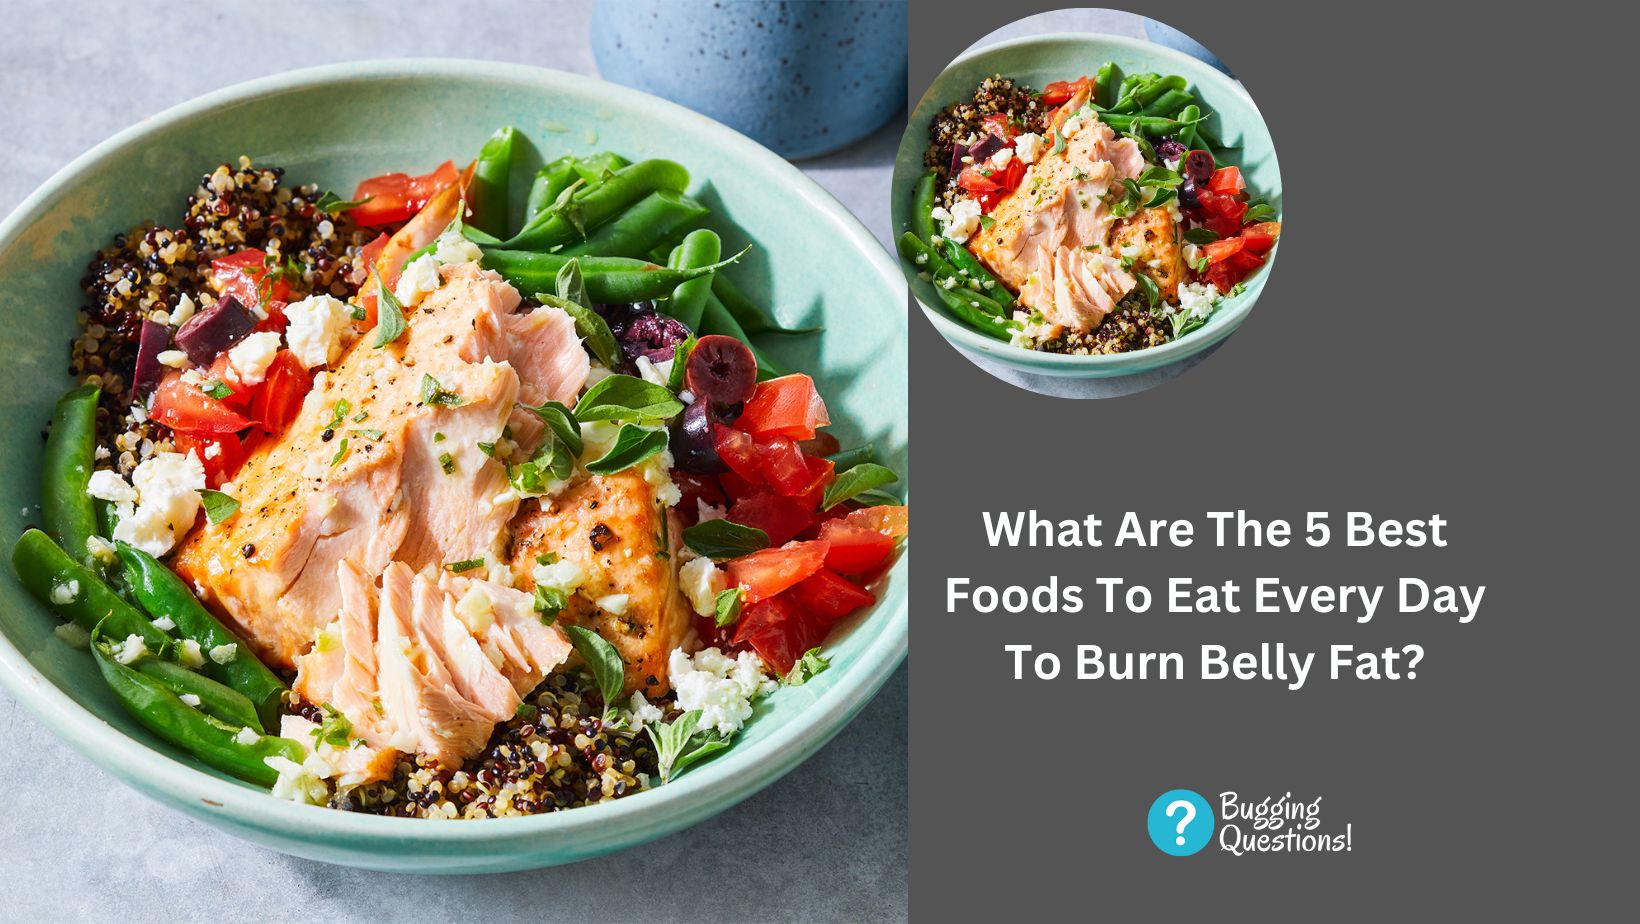 What Are The 5 Best Foods To Eat Every Day To Burn Belly Fat?